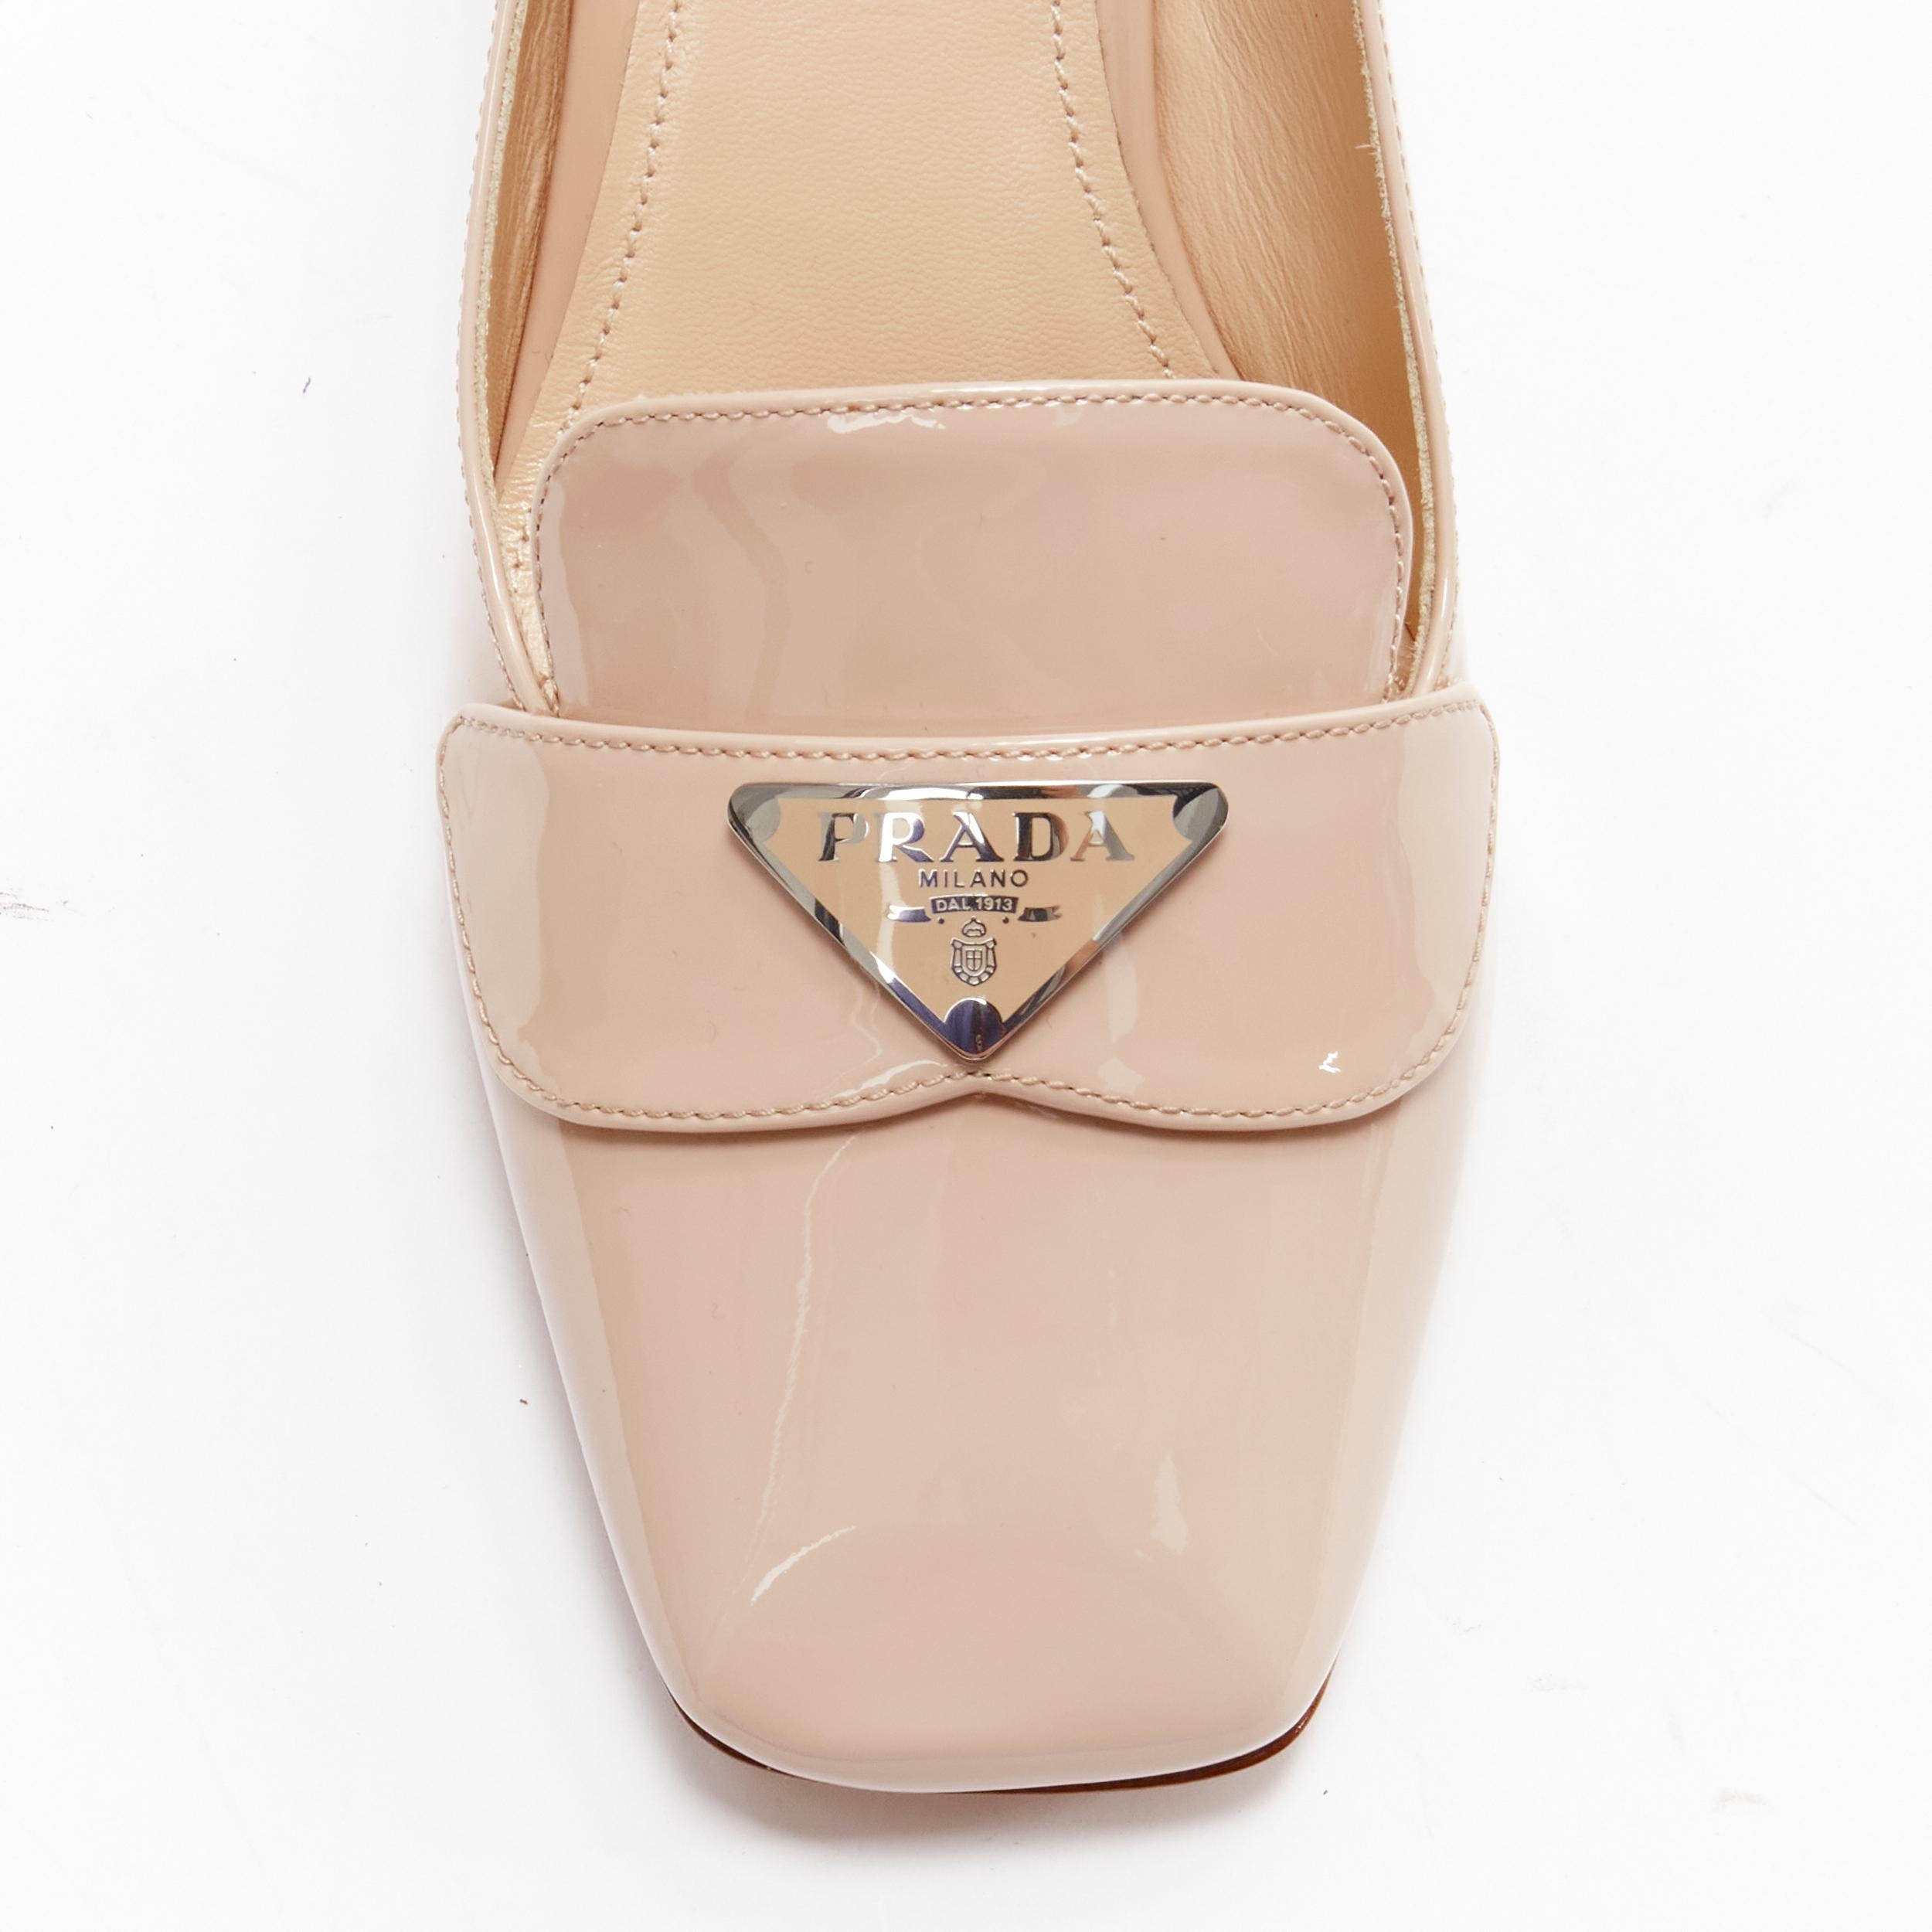 new PRADA Vernice beige patent triangle logo square heel court shoes heels EU40
Reference: TGAS/C01607
Brand: Prada
Designer: Miuccia Prada
Material: Patent Leather
Color: Beige
Pattern: Solid
Closure: Slip On
Lining: Leather
Extra Details: